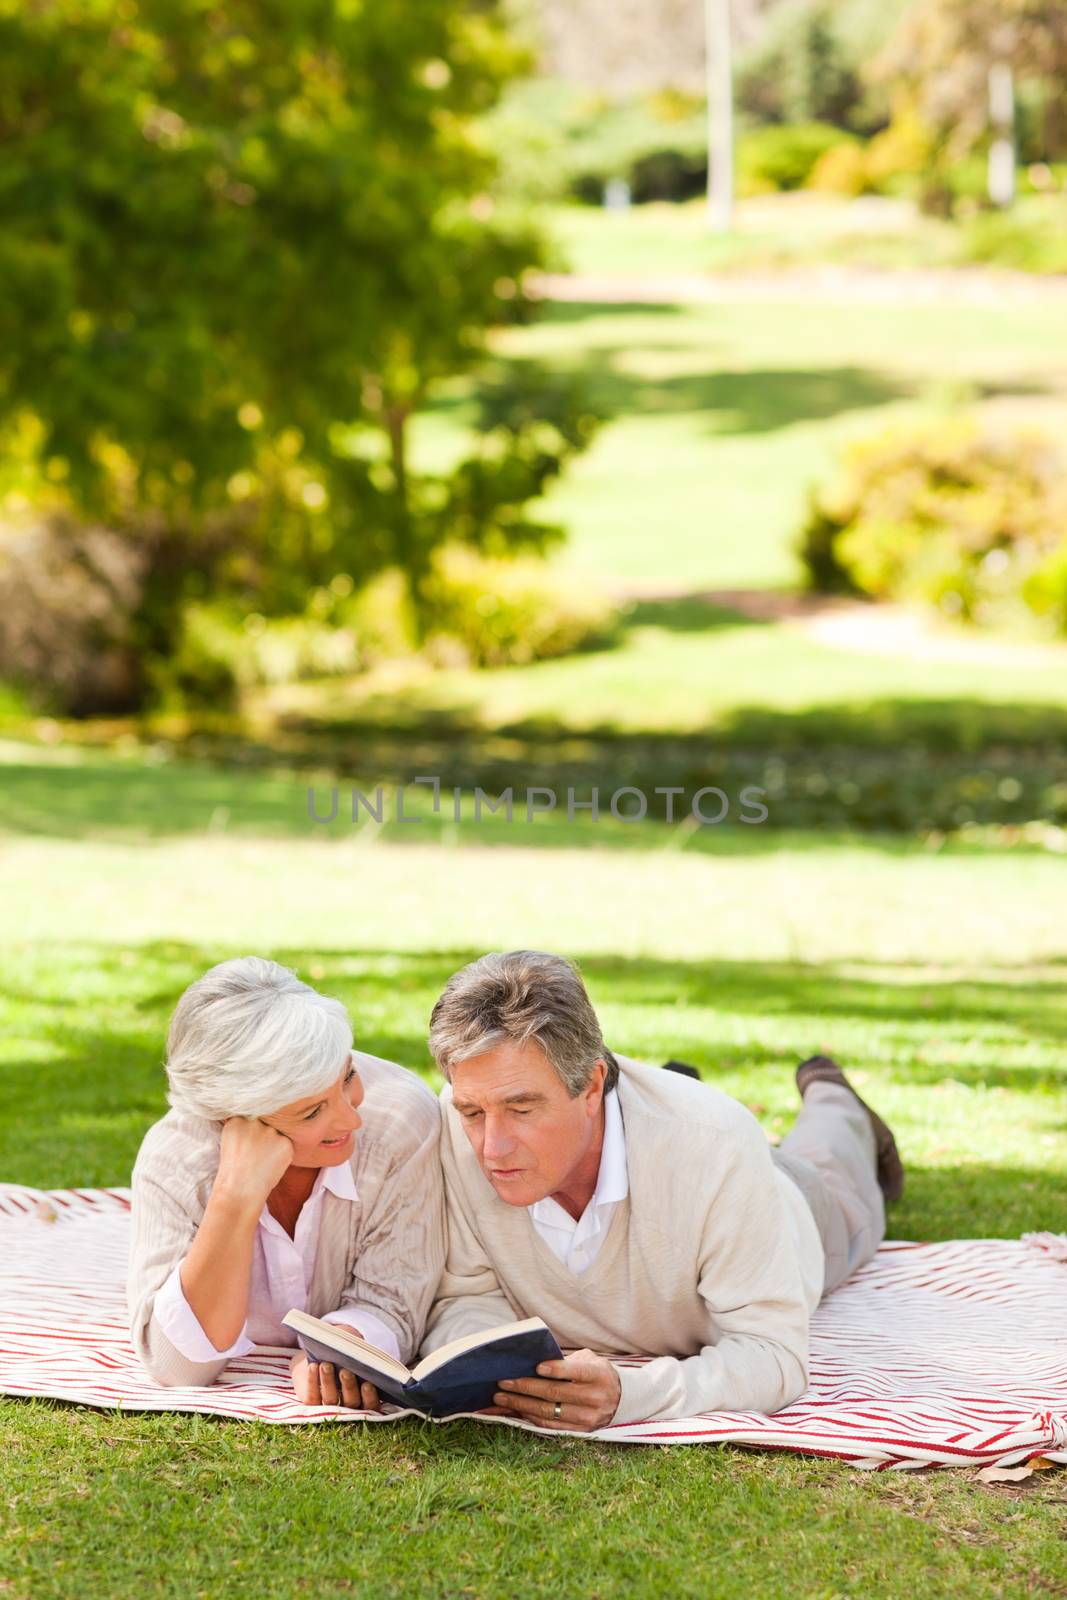 Couple reading a book in the park during the summer